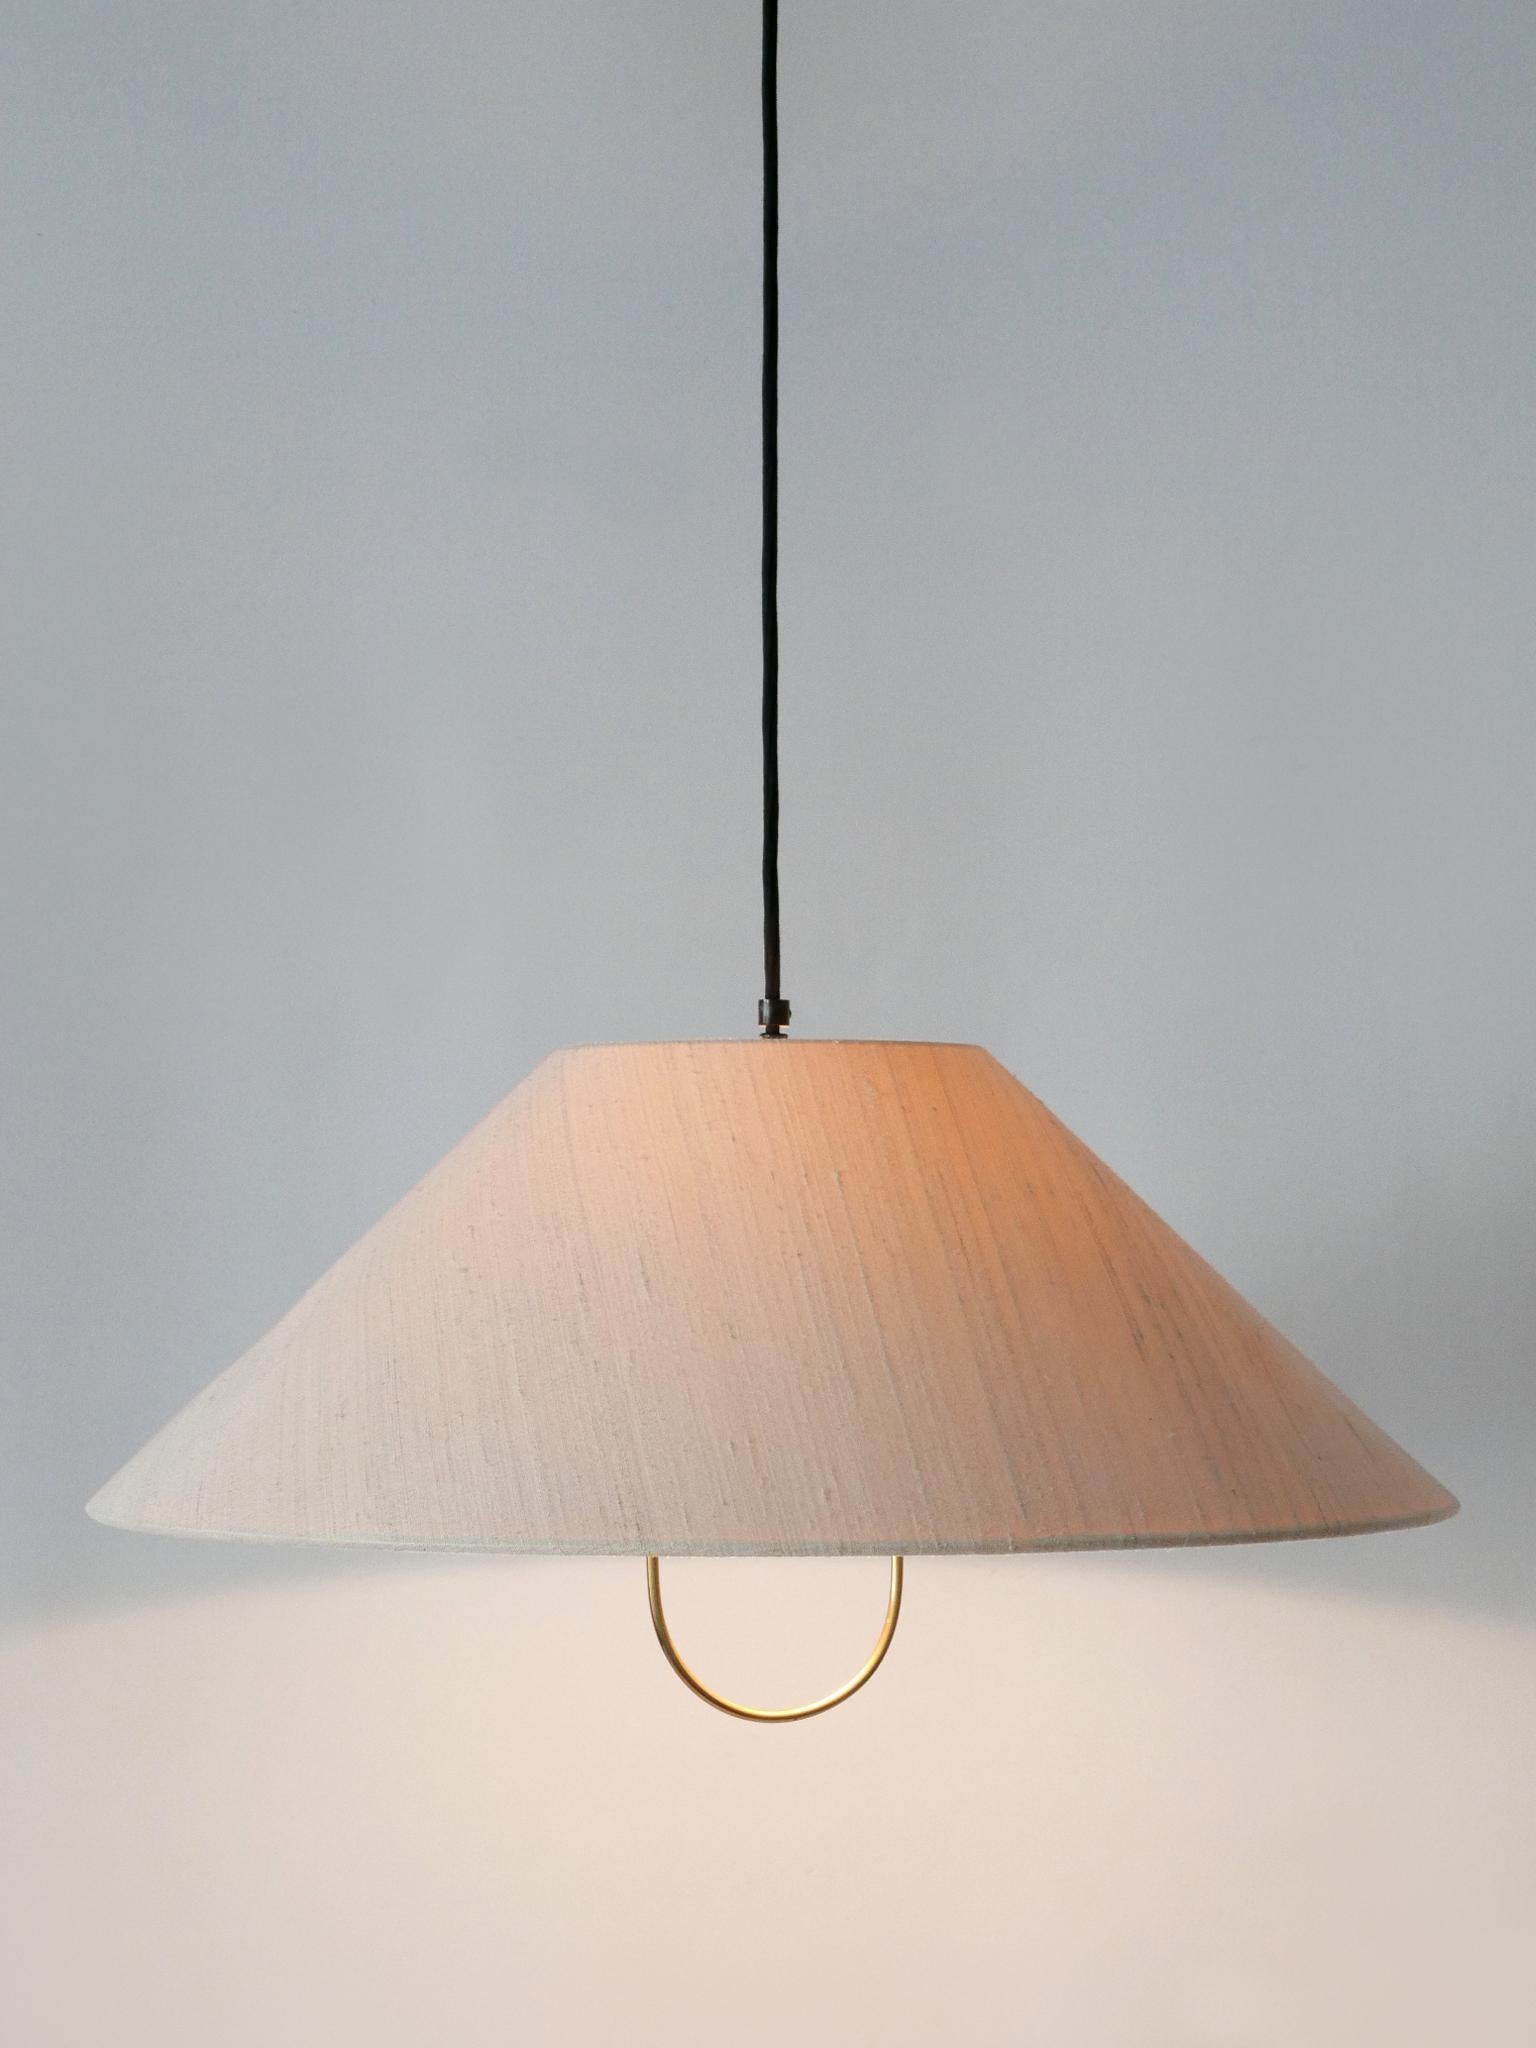 Mid-20th Century Rare & Early Counterweight Pendant Lamp by Florian Schulz Germany, 1960s